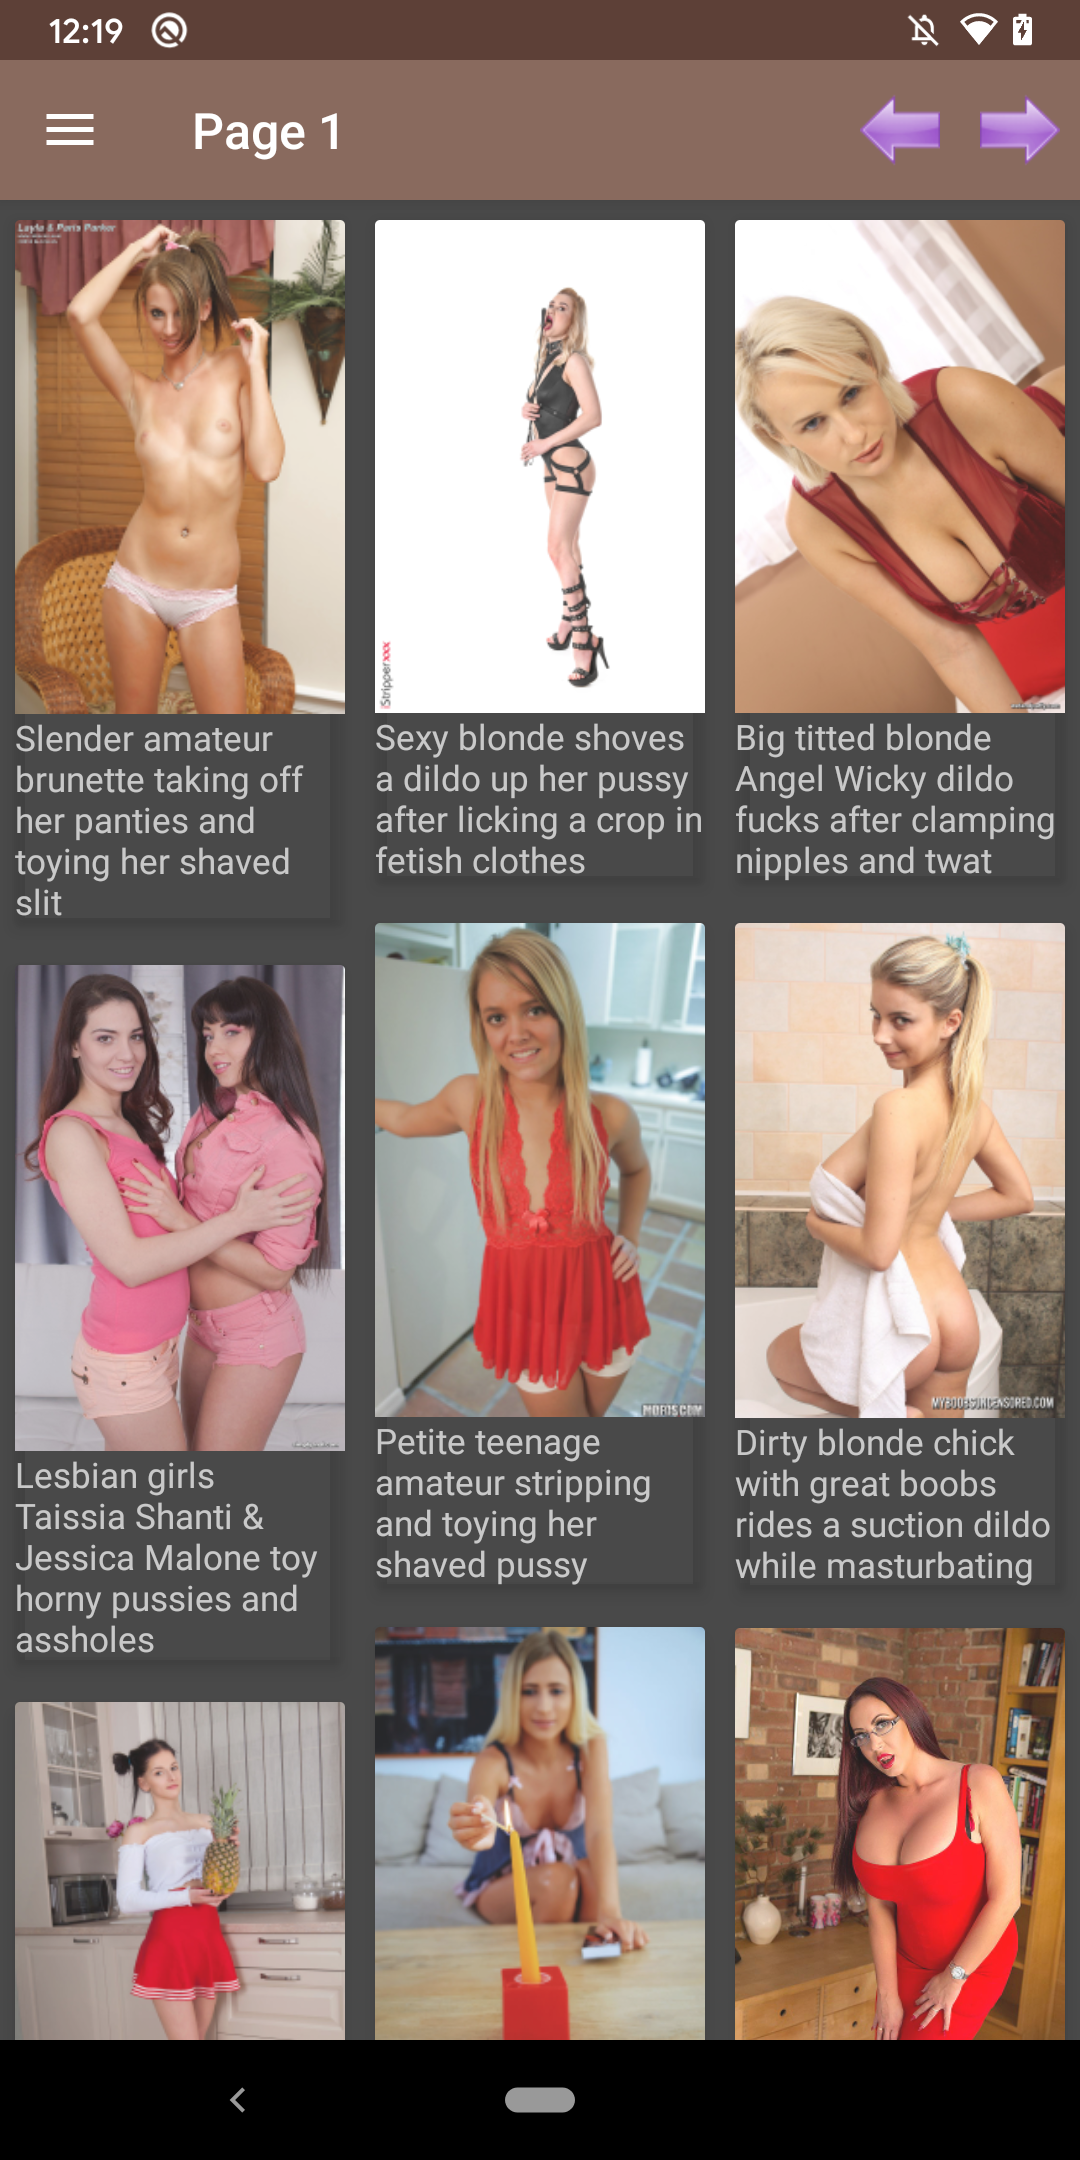 Dildo Galleries star,apk,dildo,stars,sexy,android,adult,free,app,photos,porn,hot,gallery,pornstars,picture,viewer,amateurs,apps,pics,pic,pictures,download,pornstar,galleries,collections,hentai,erotic,downloader